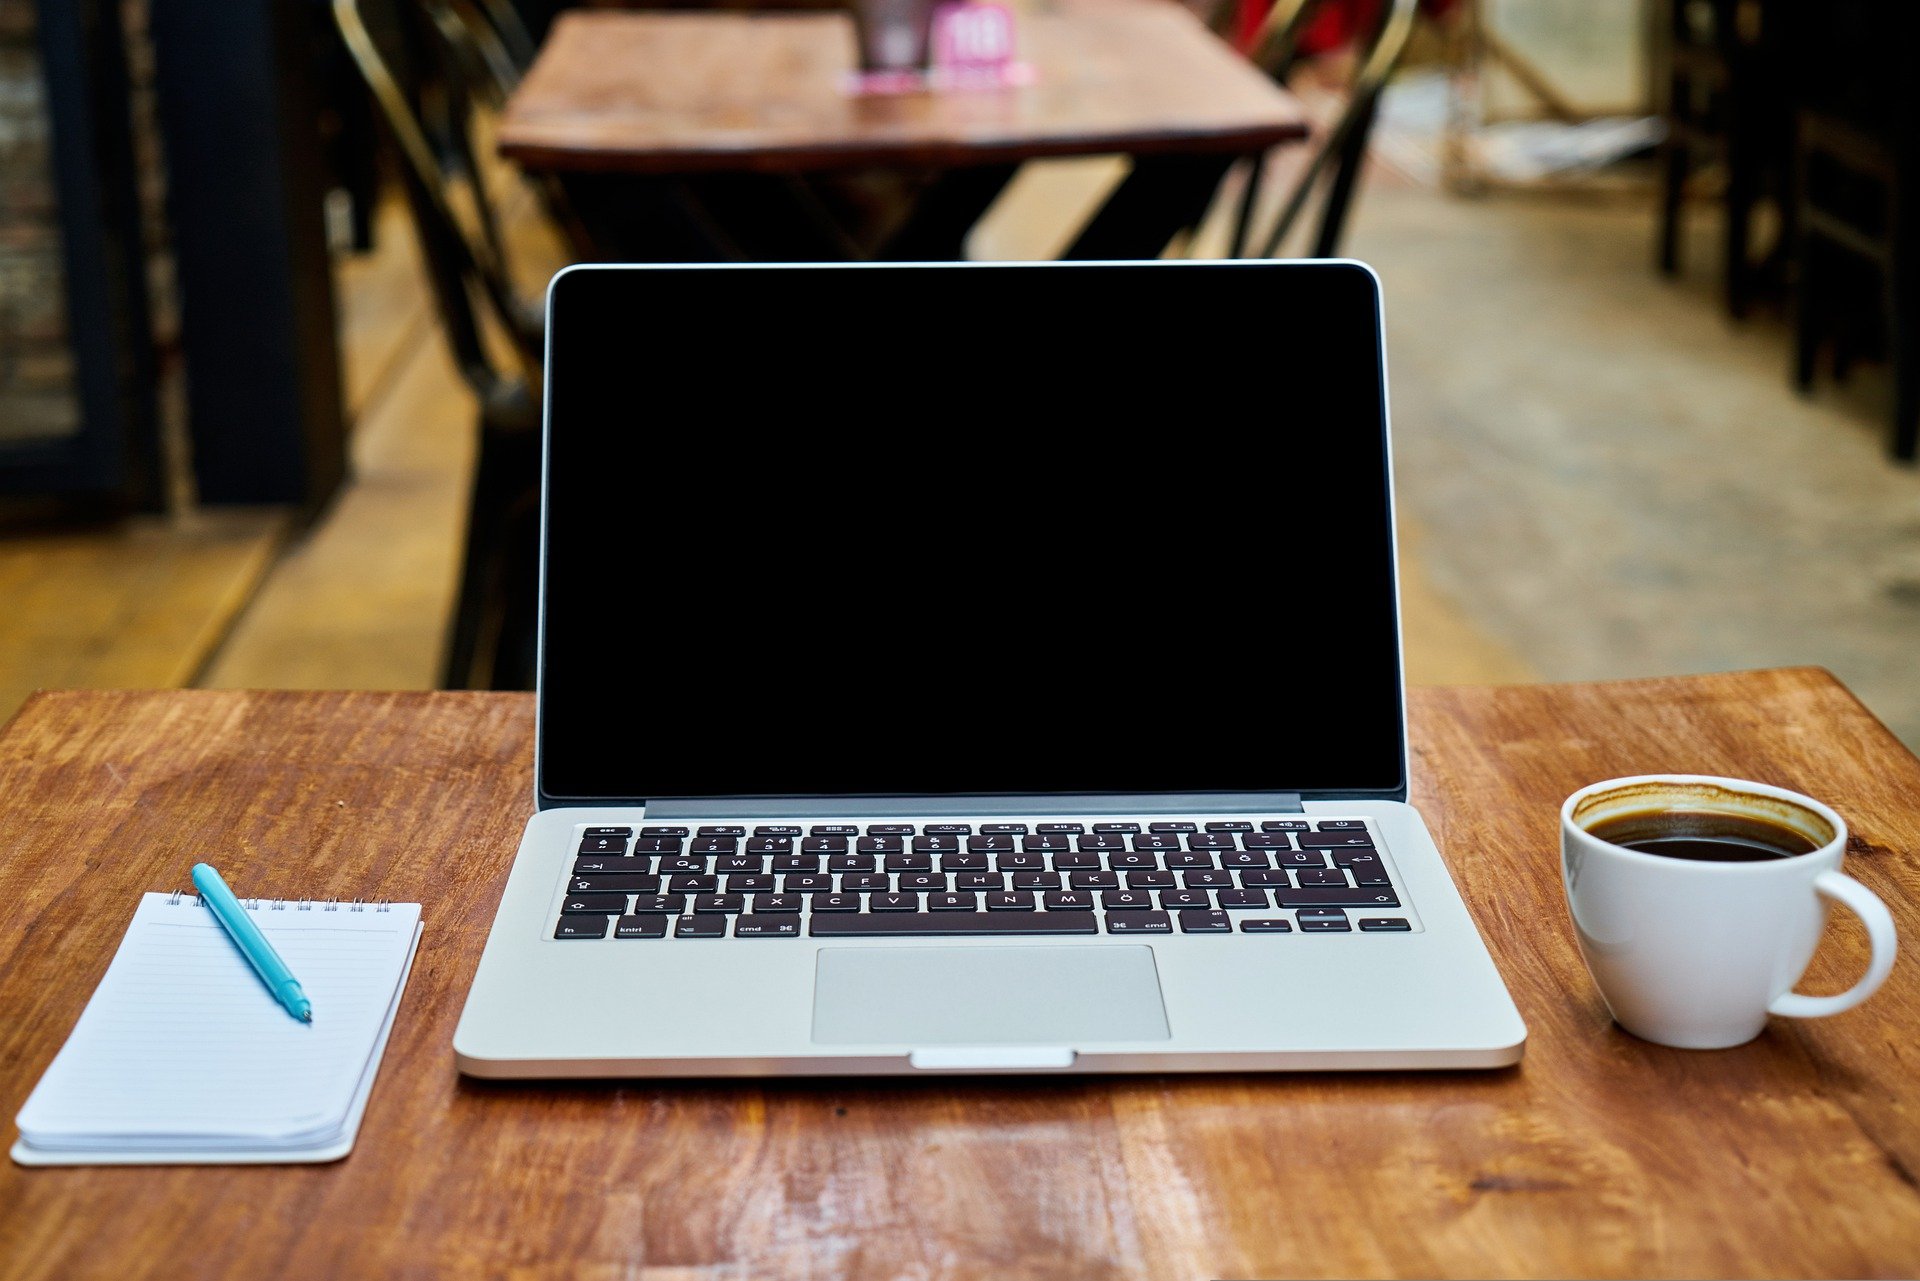 Stock photo of a laptop on a table with a notepad and cup of coffee